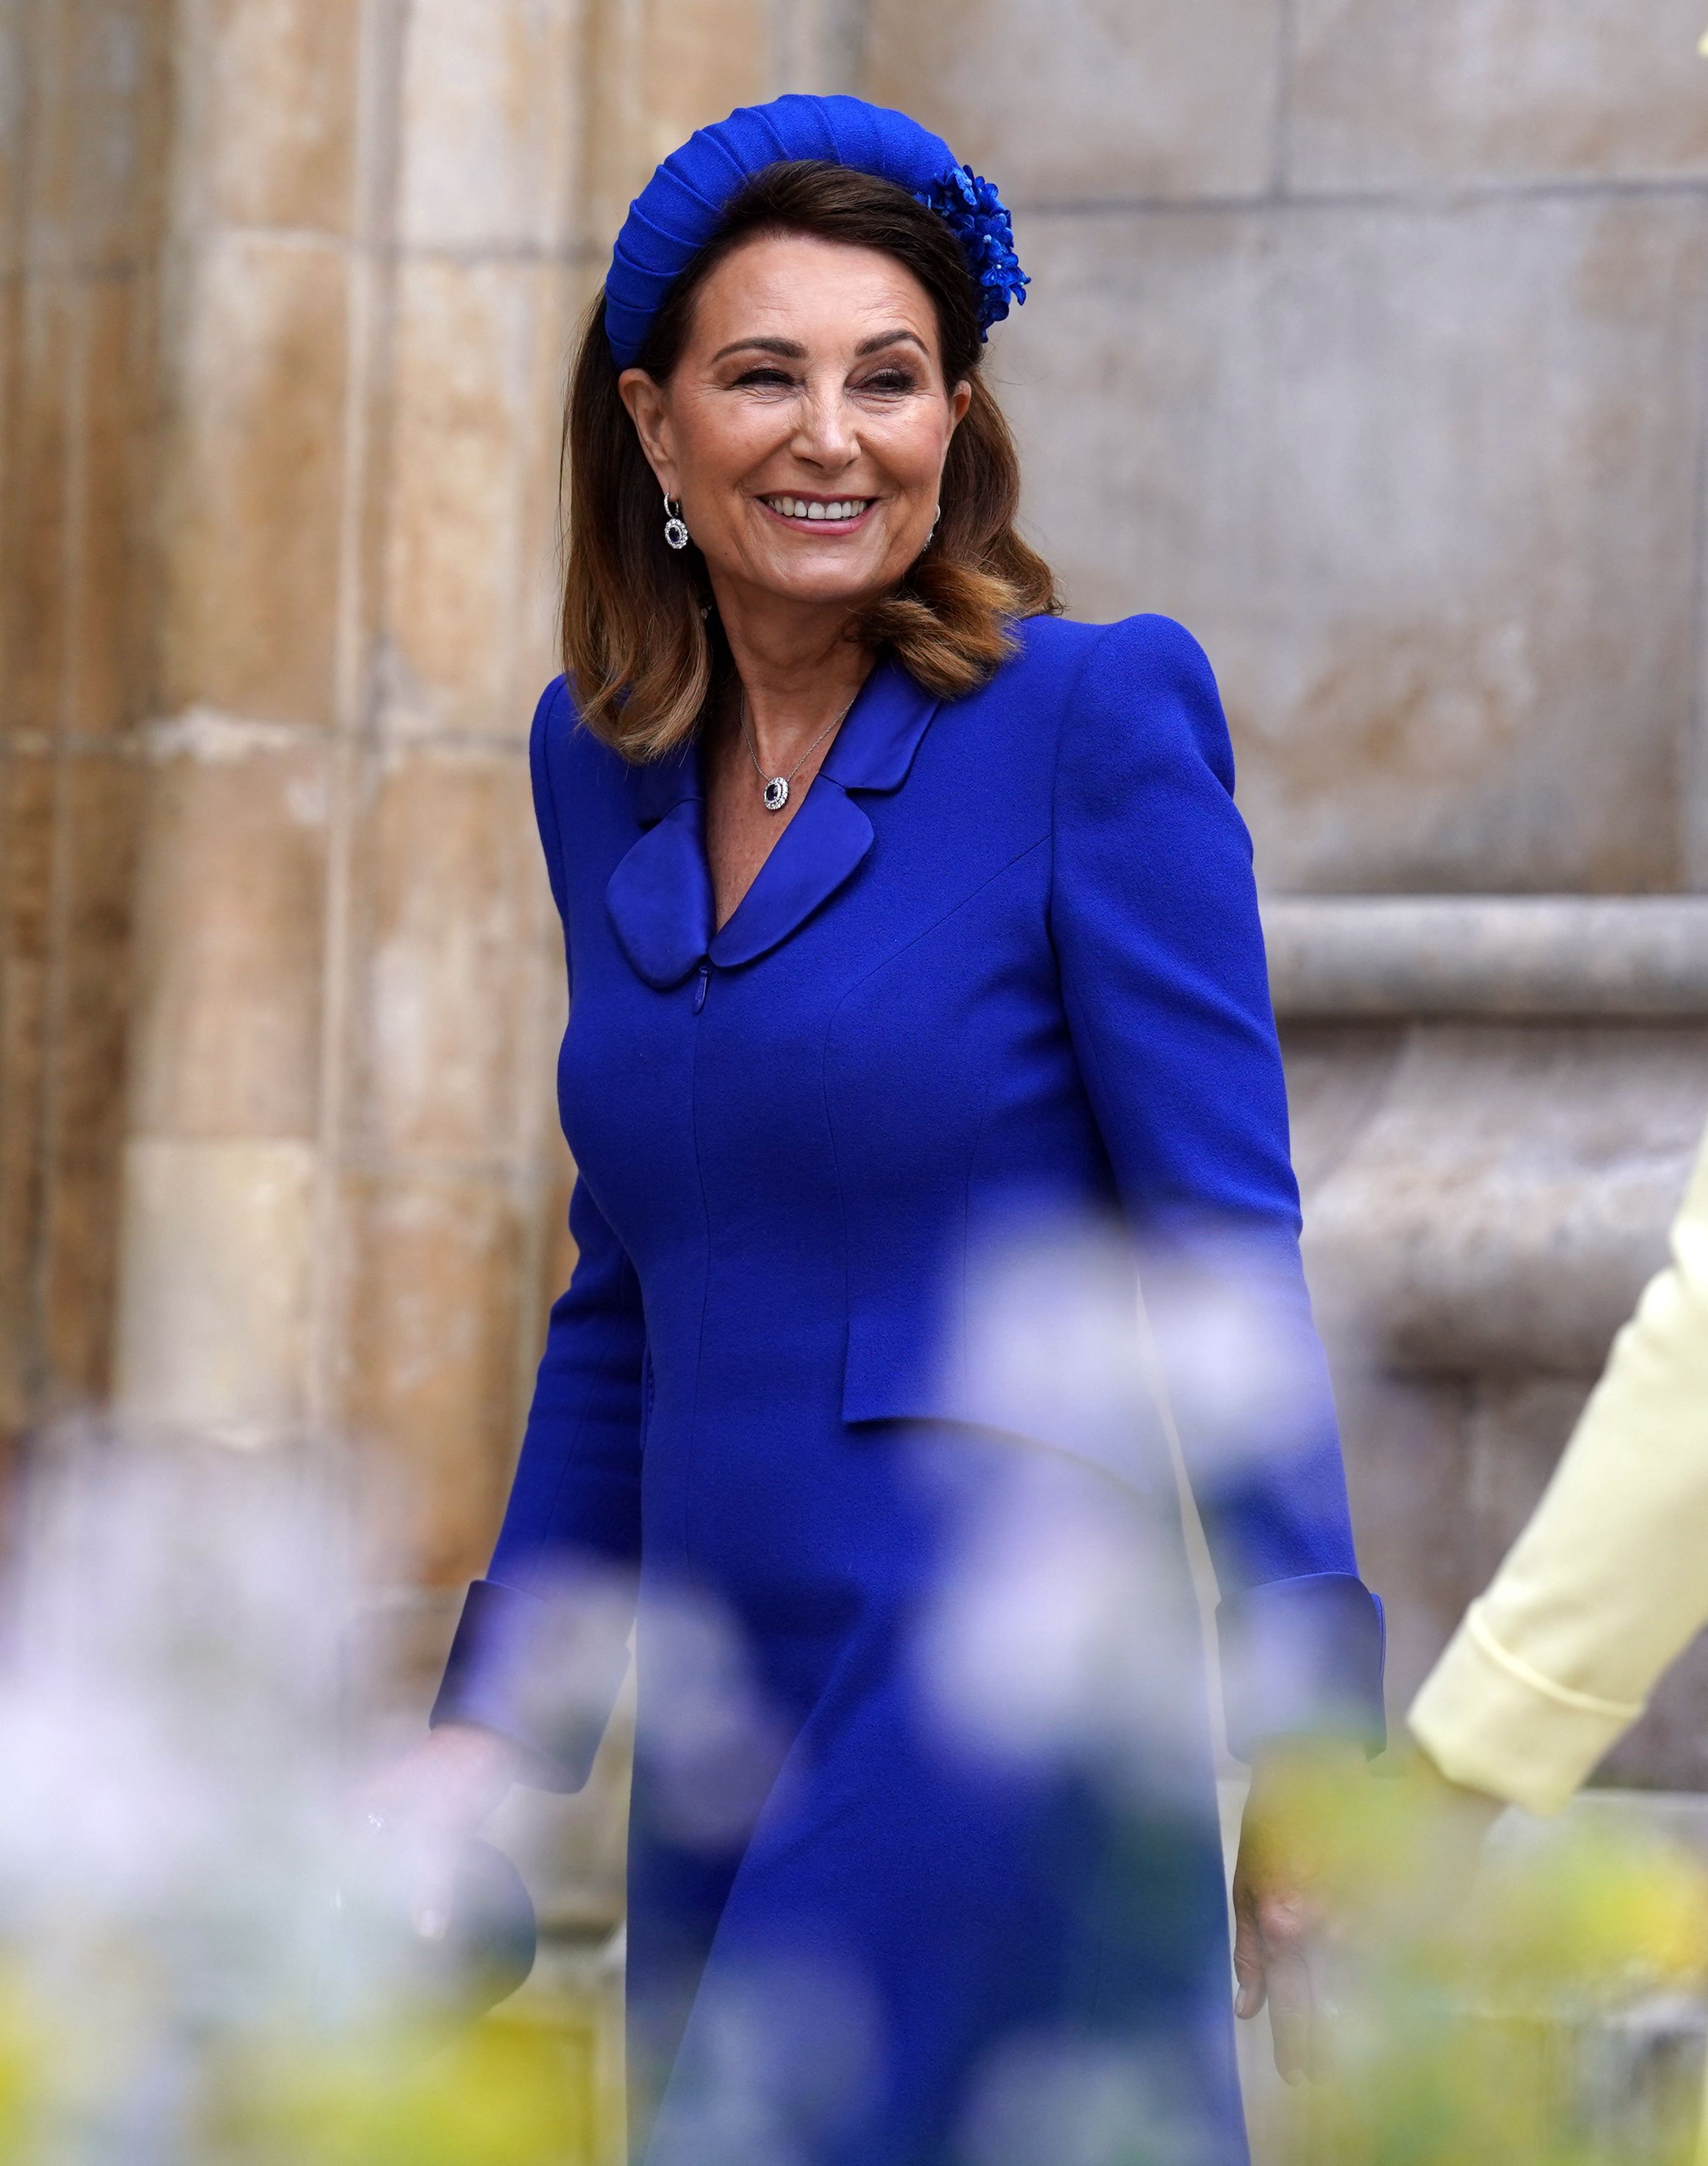 Carole Middleton, mother of Prince William's wife Kate Middleton, also attended the event